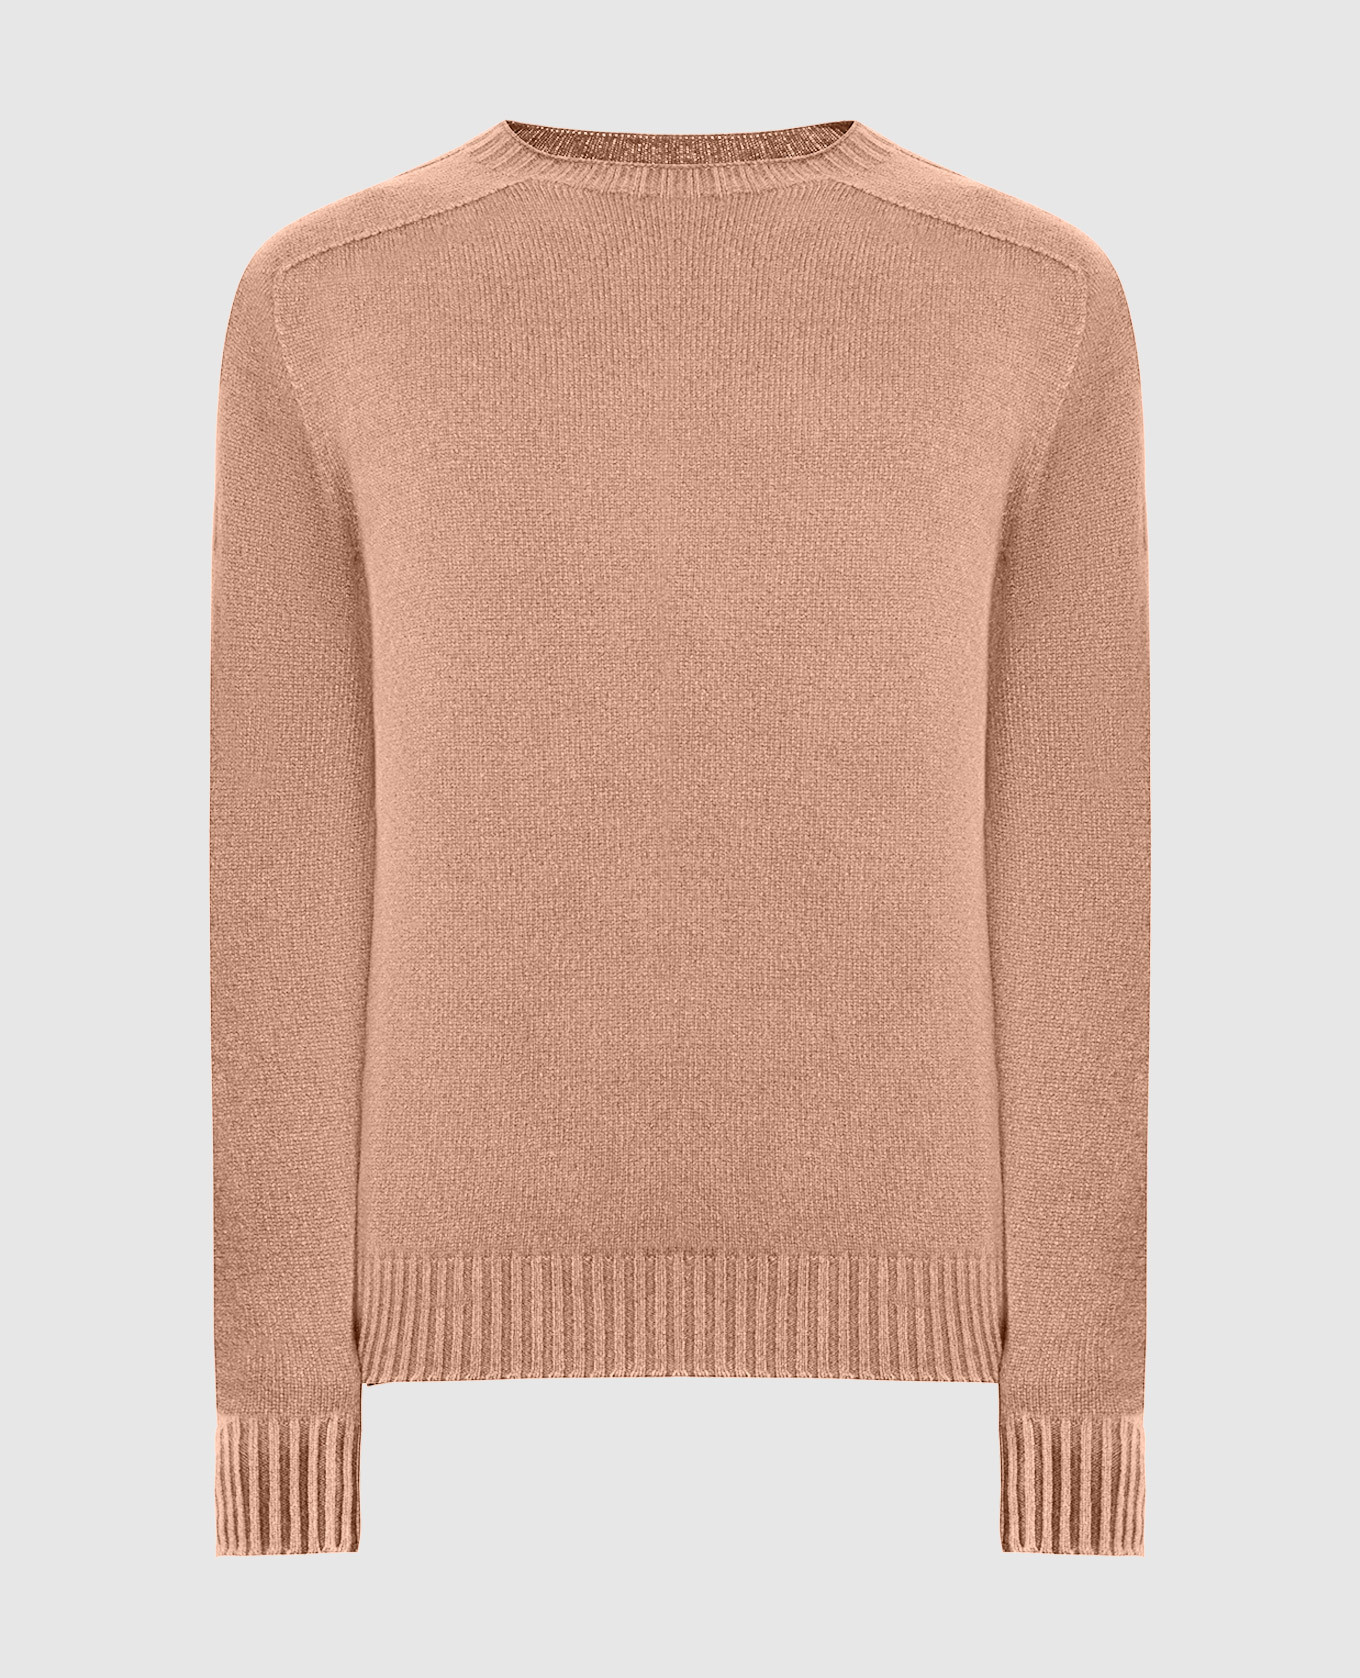 Two-way brown cashmere jumper